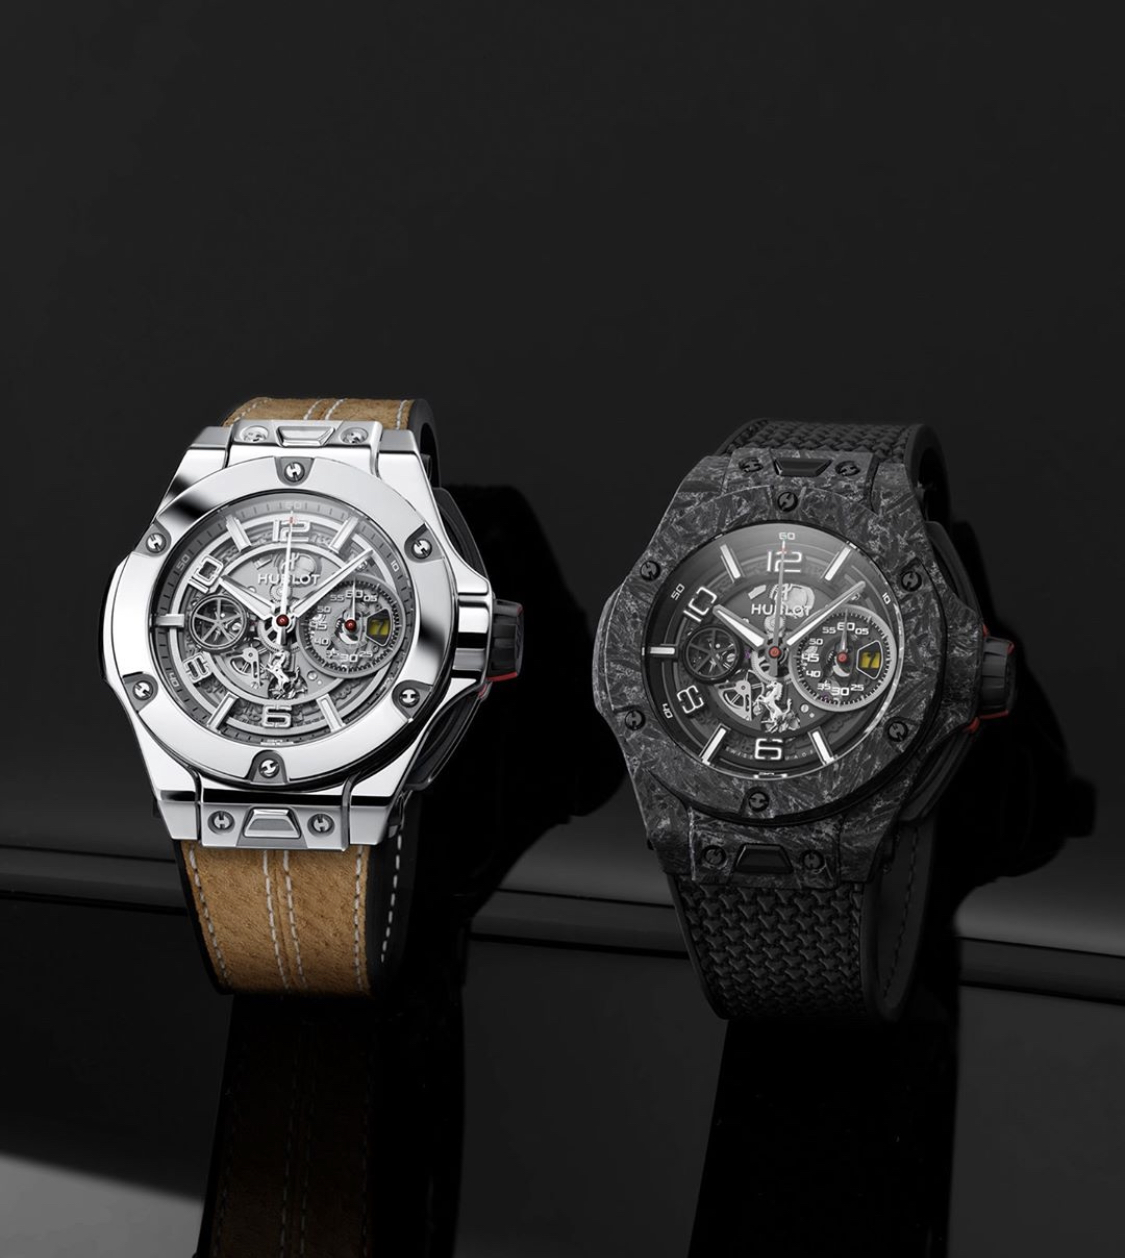 Hublot Launches Two Limited Edition Watches To Celebrate Ferrari’s 1000th Grand Prix